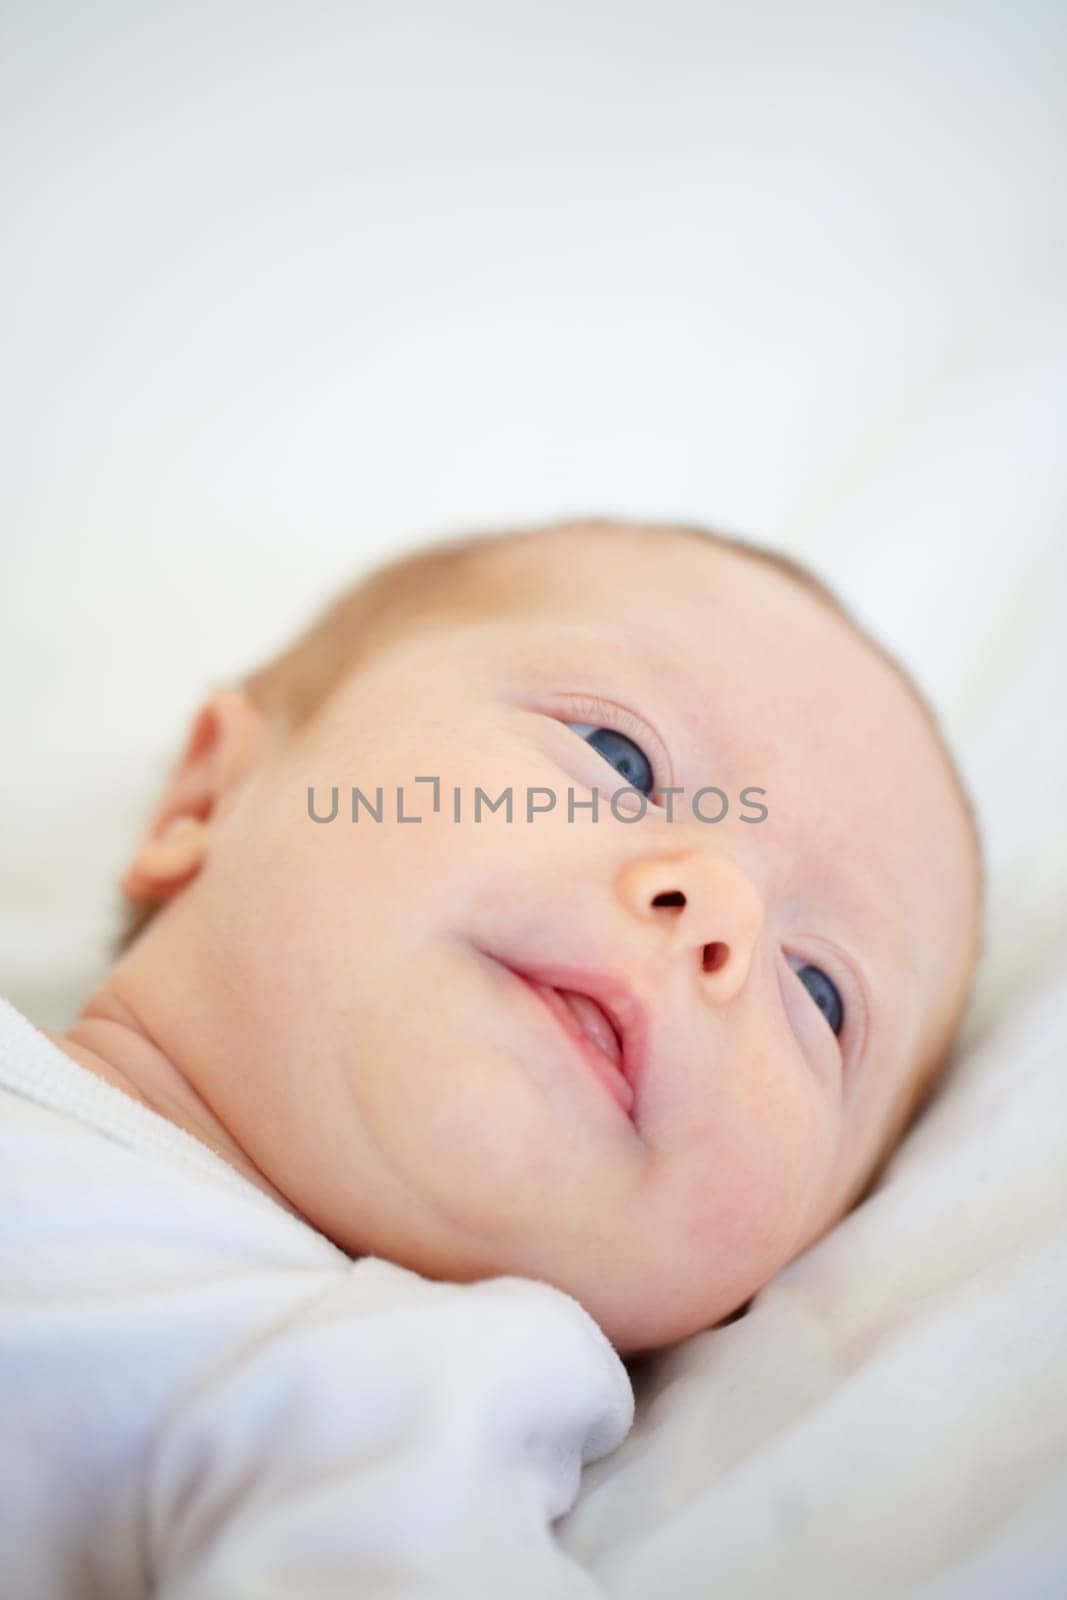 Closeup, baby and face for wake up on bed from good dream, sleep or nap in nursery. Infant, looking and relaxing on pillow for child growth, cognitive and development in hope for milestone of future by YuriArcurs